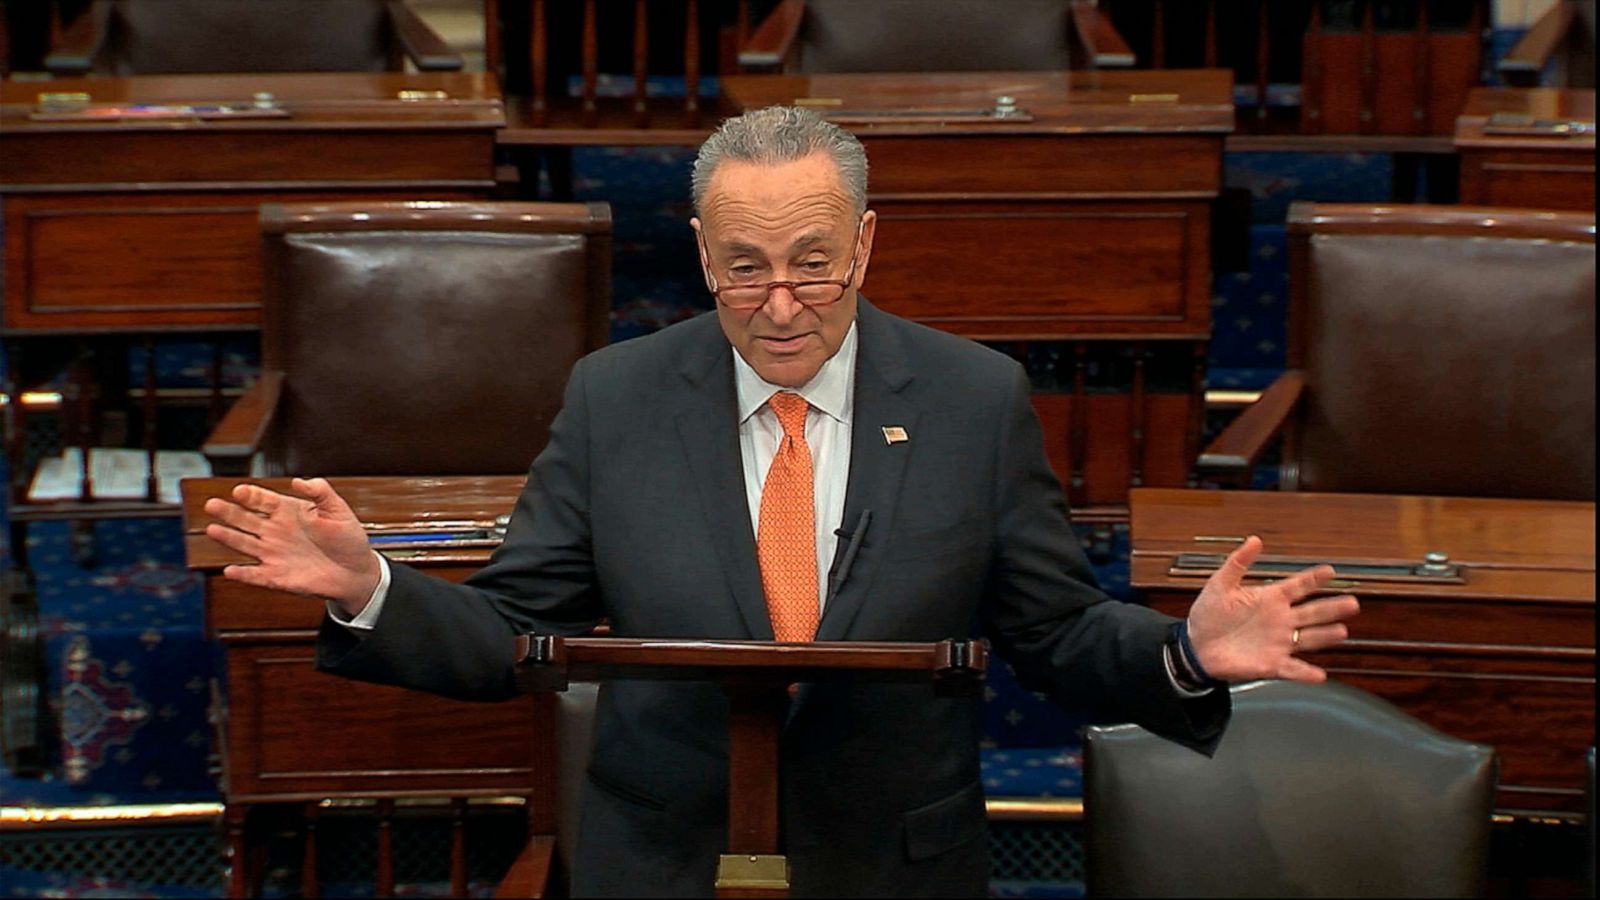 Sen. Chuck Schumer celebrates gains in $2T stimulus deal, says Democrats  'improved it' - ABC News